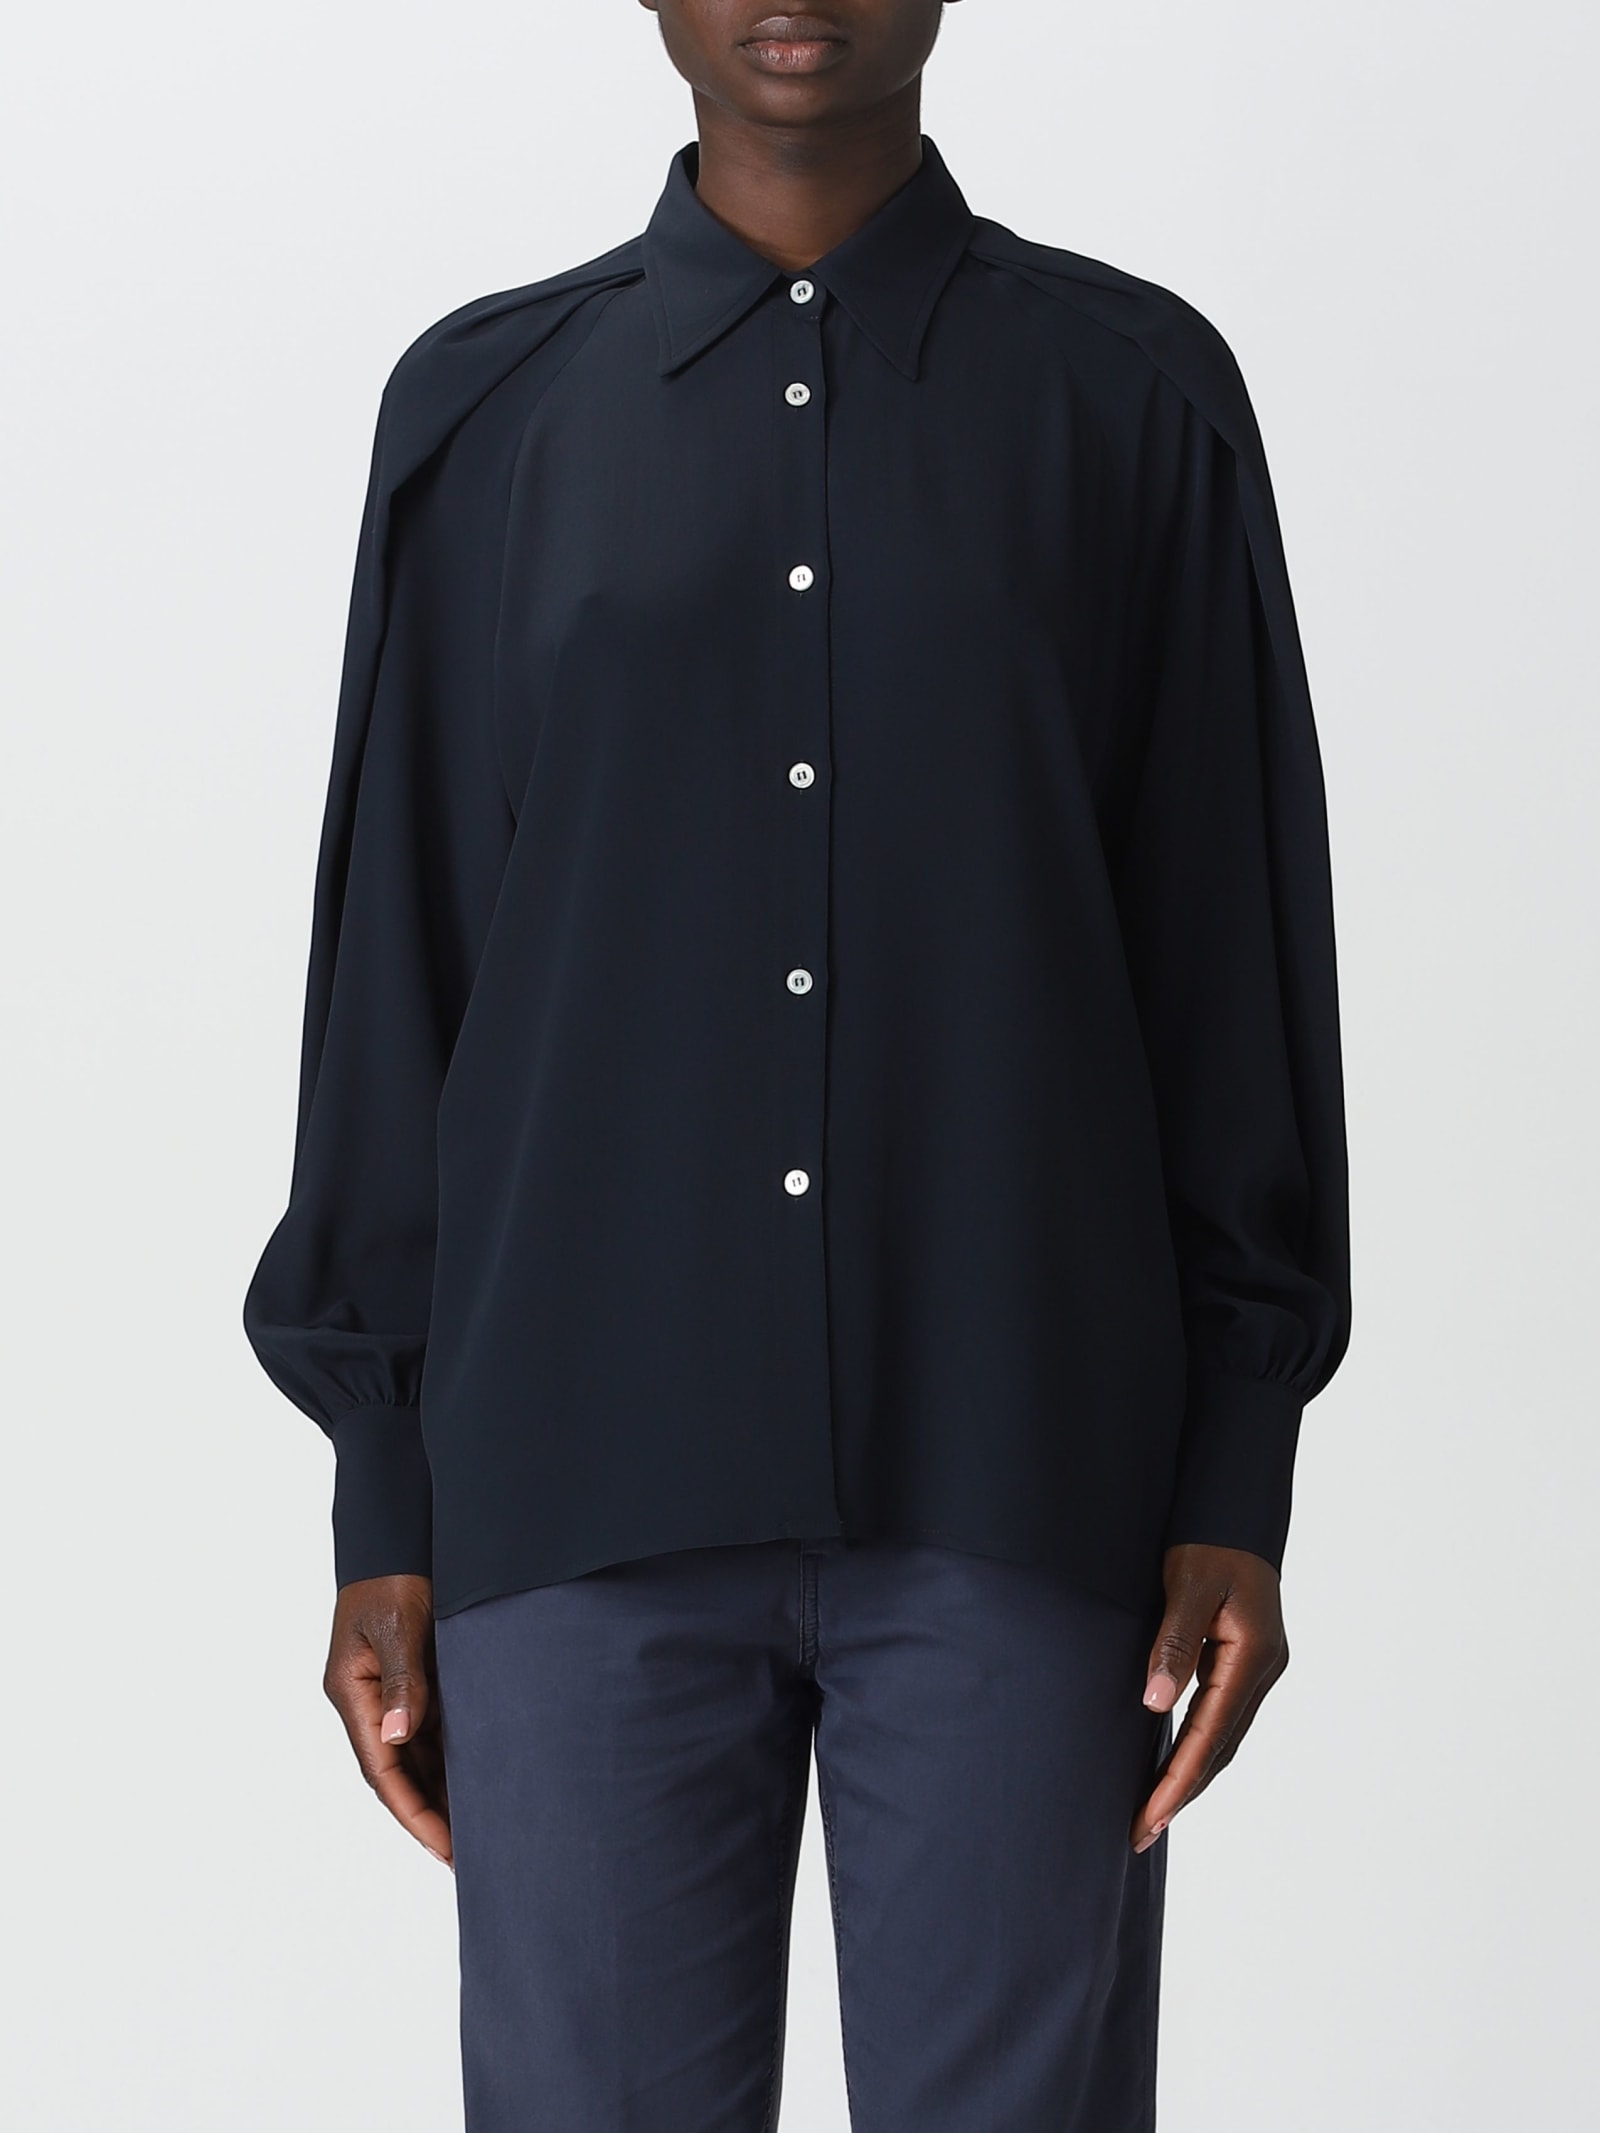 Mauro Grifoni Shirt With Shoulder Detail In Blue